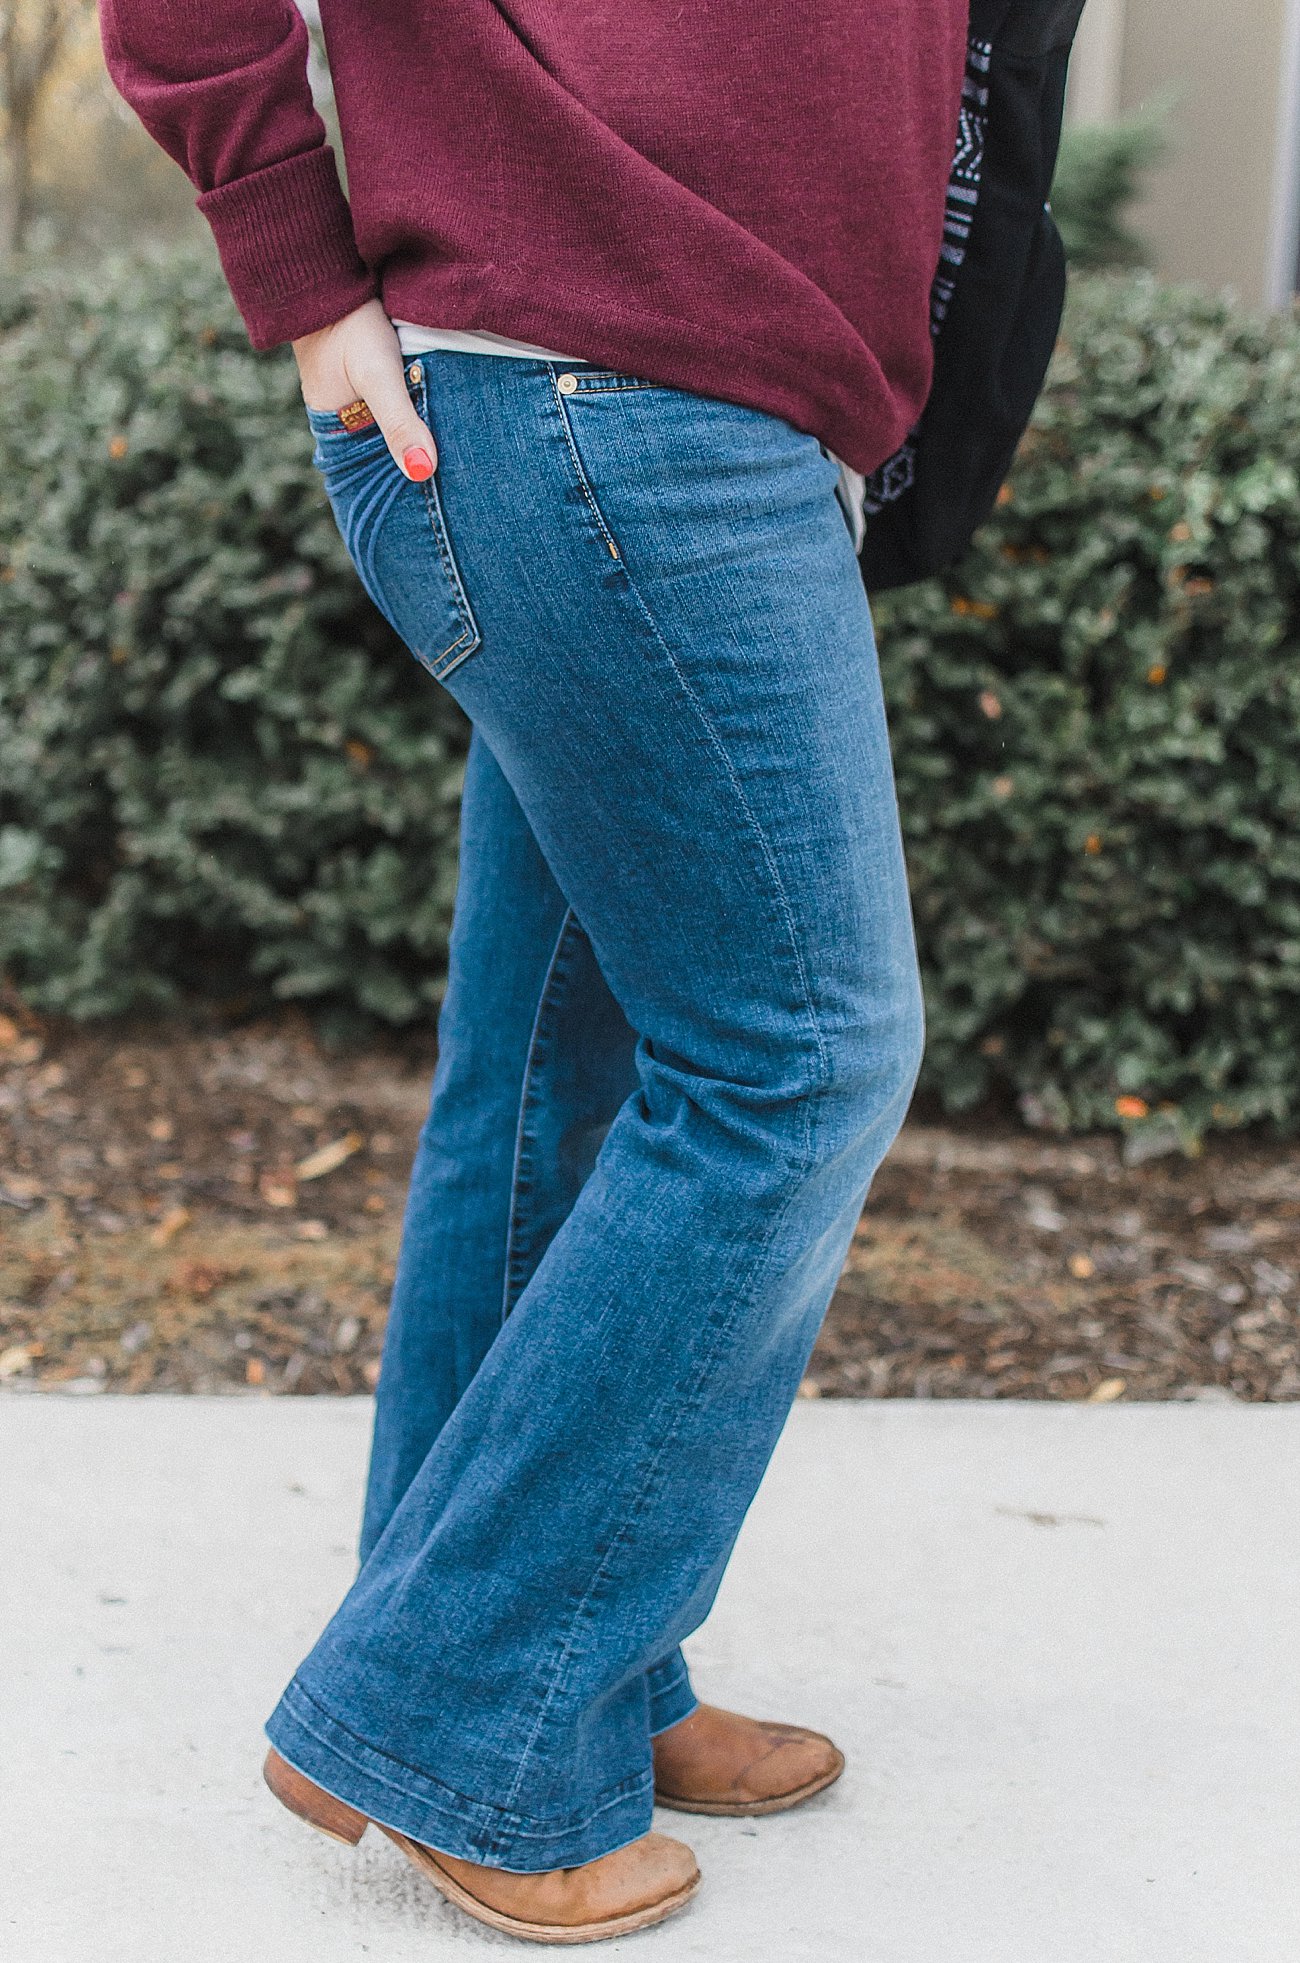 Ethical and Fair Trade Fashion - Hope Made in the World Alpaca Sweater, Dojo flare jeans, Rapha House bag, Milk and Honey market jewelry - fall fashion (4) - The Classic Fall Sweater Made to Last by North Carolina ethical style blogger Still Being Molly